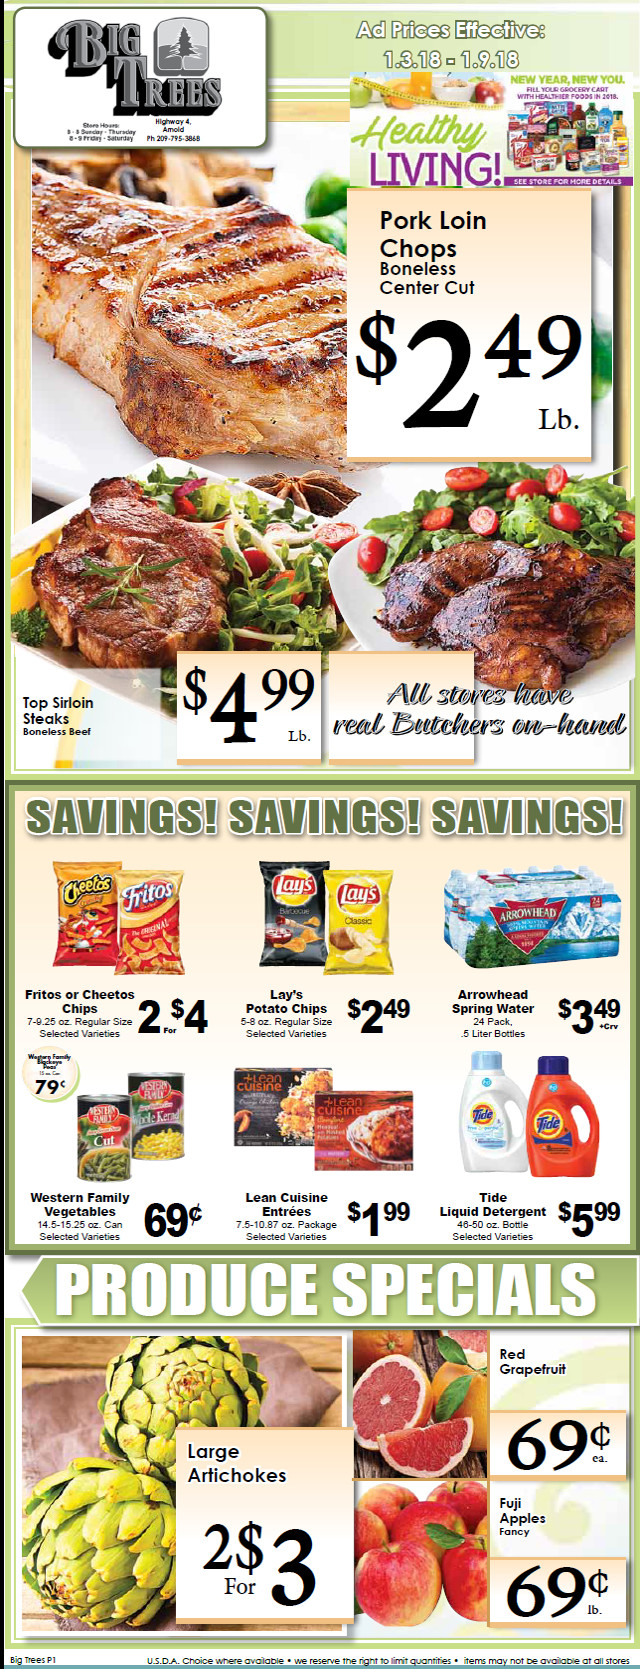 Big Trees Market Weekly Ad & Specials Through January 9th